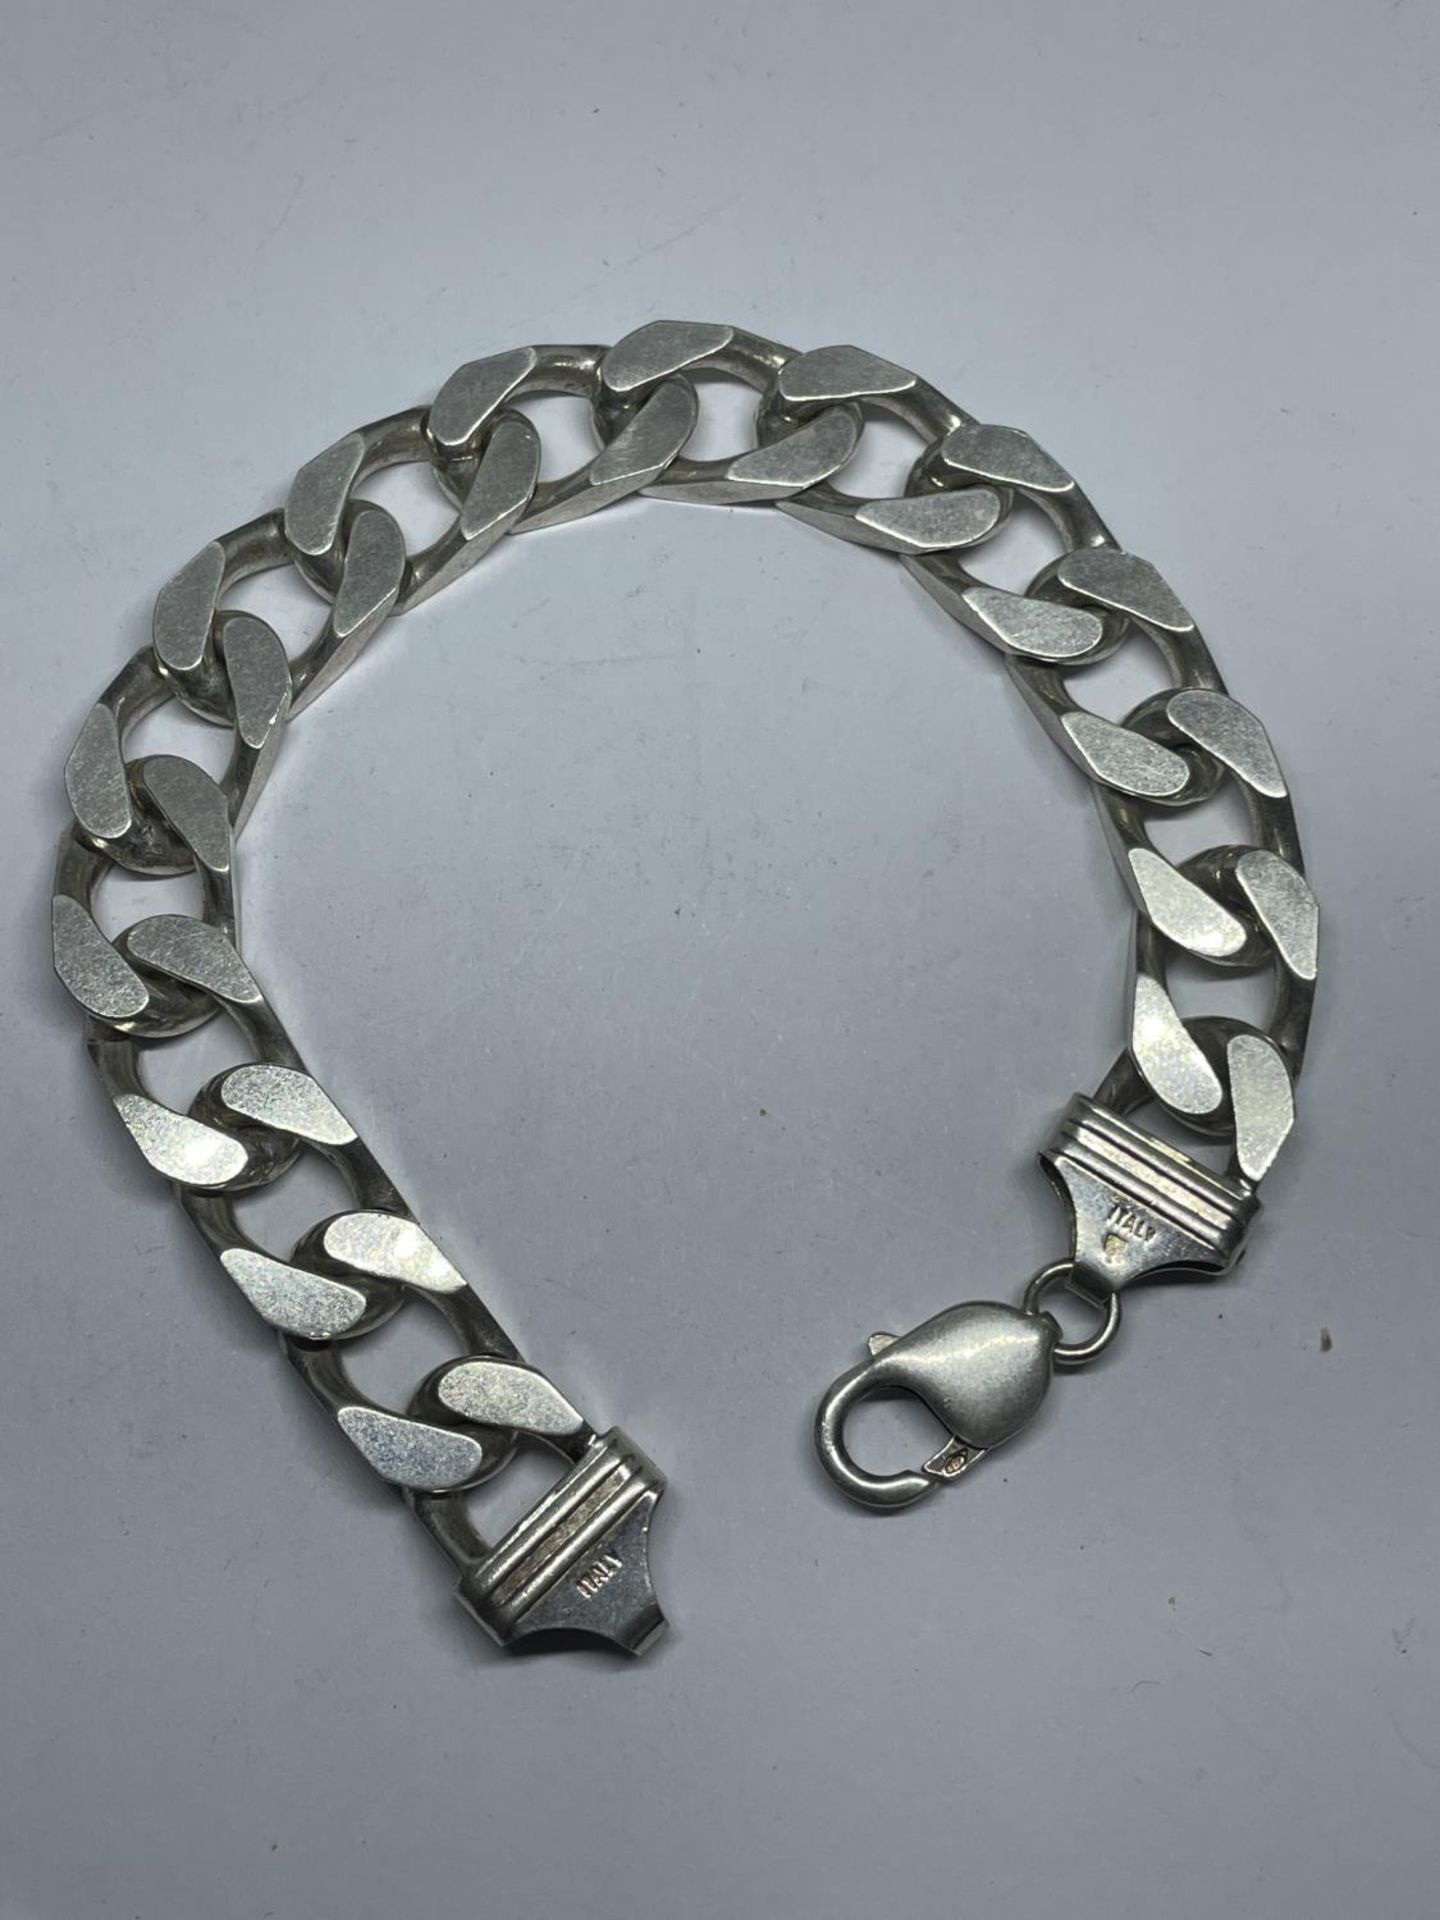 A HEAVY MARKED SILVER FLAT LINK BRACELET LENGTH 23CM WEIGHT 63.8 GRAMS